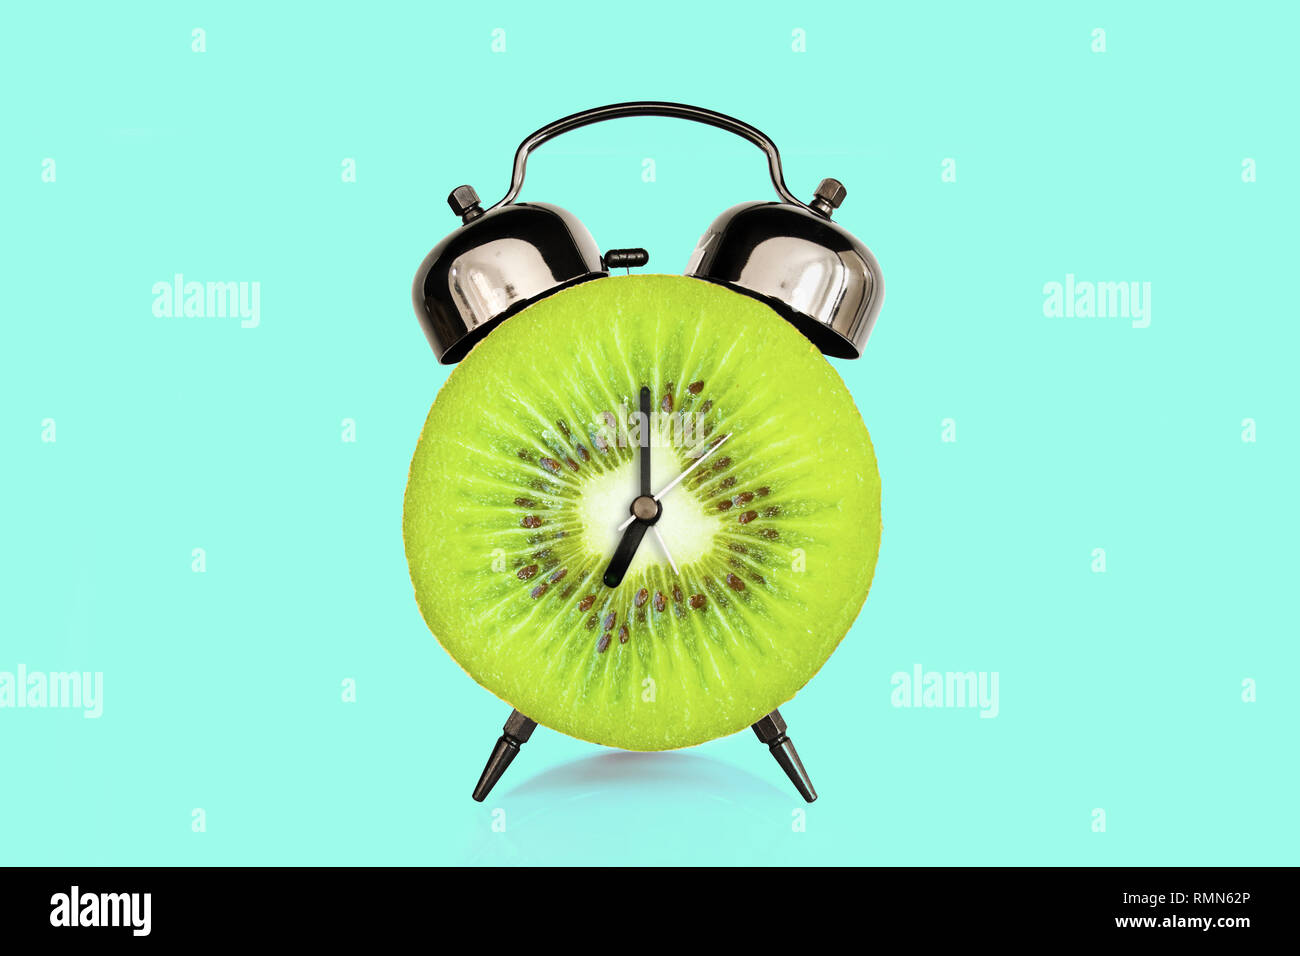 Kiwi slice on alarm clock, blue pastel background. fruit and vitamins diet at breakfast nutrition concept Stock Photo